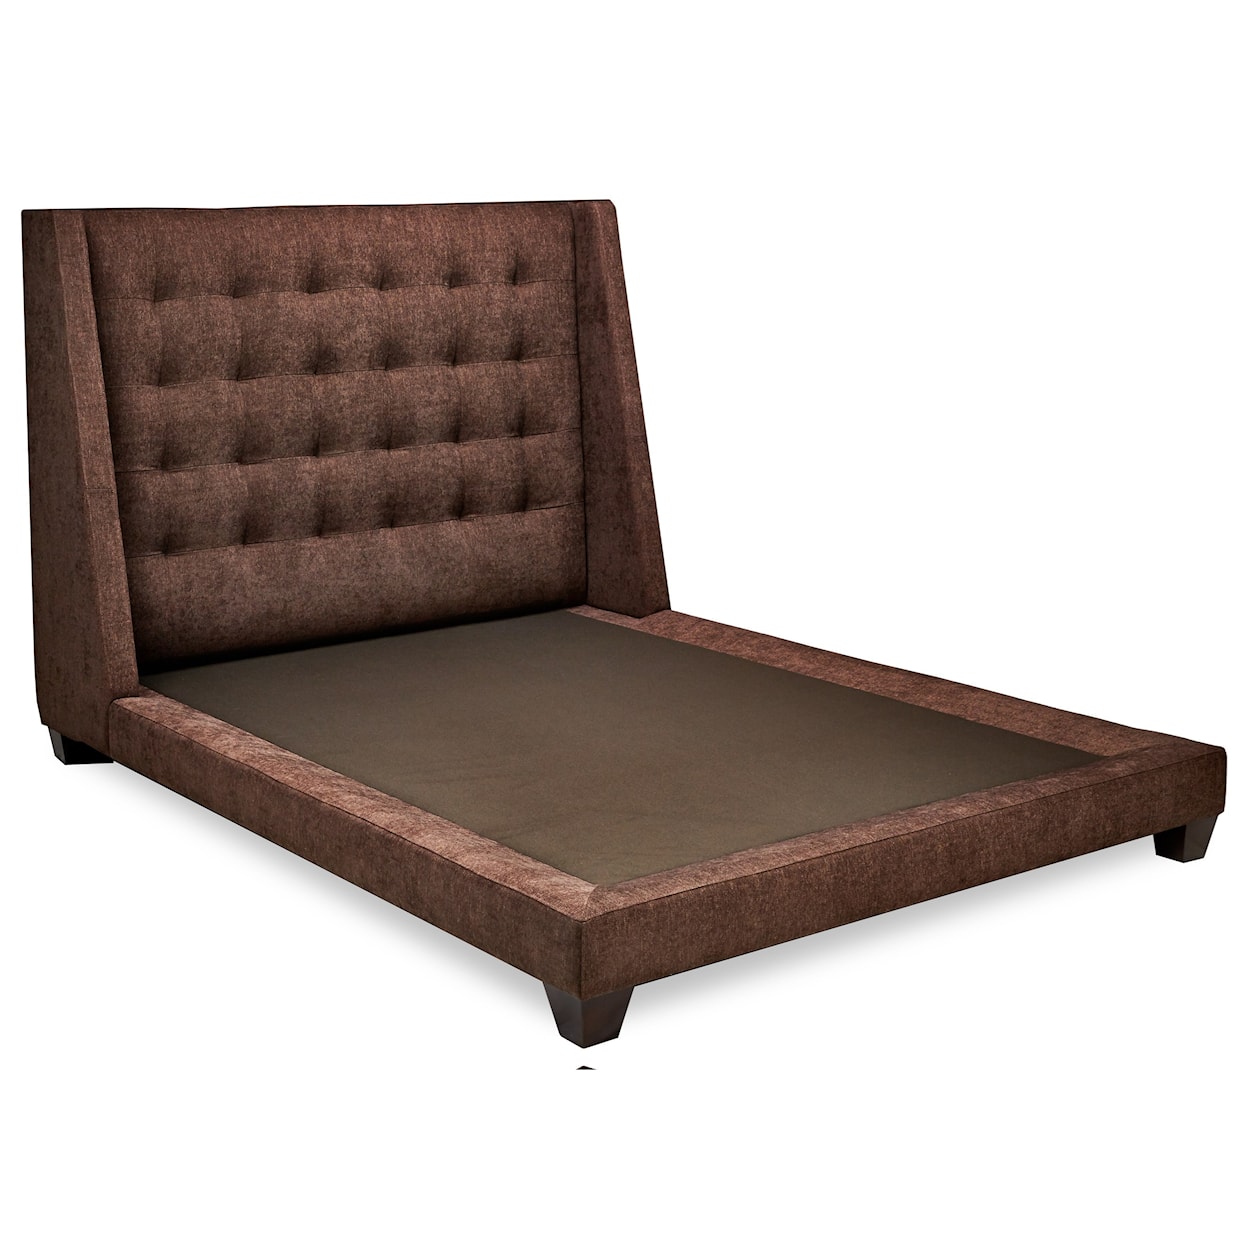 American Leather Shaw Queen Upholstered Shelter Bed